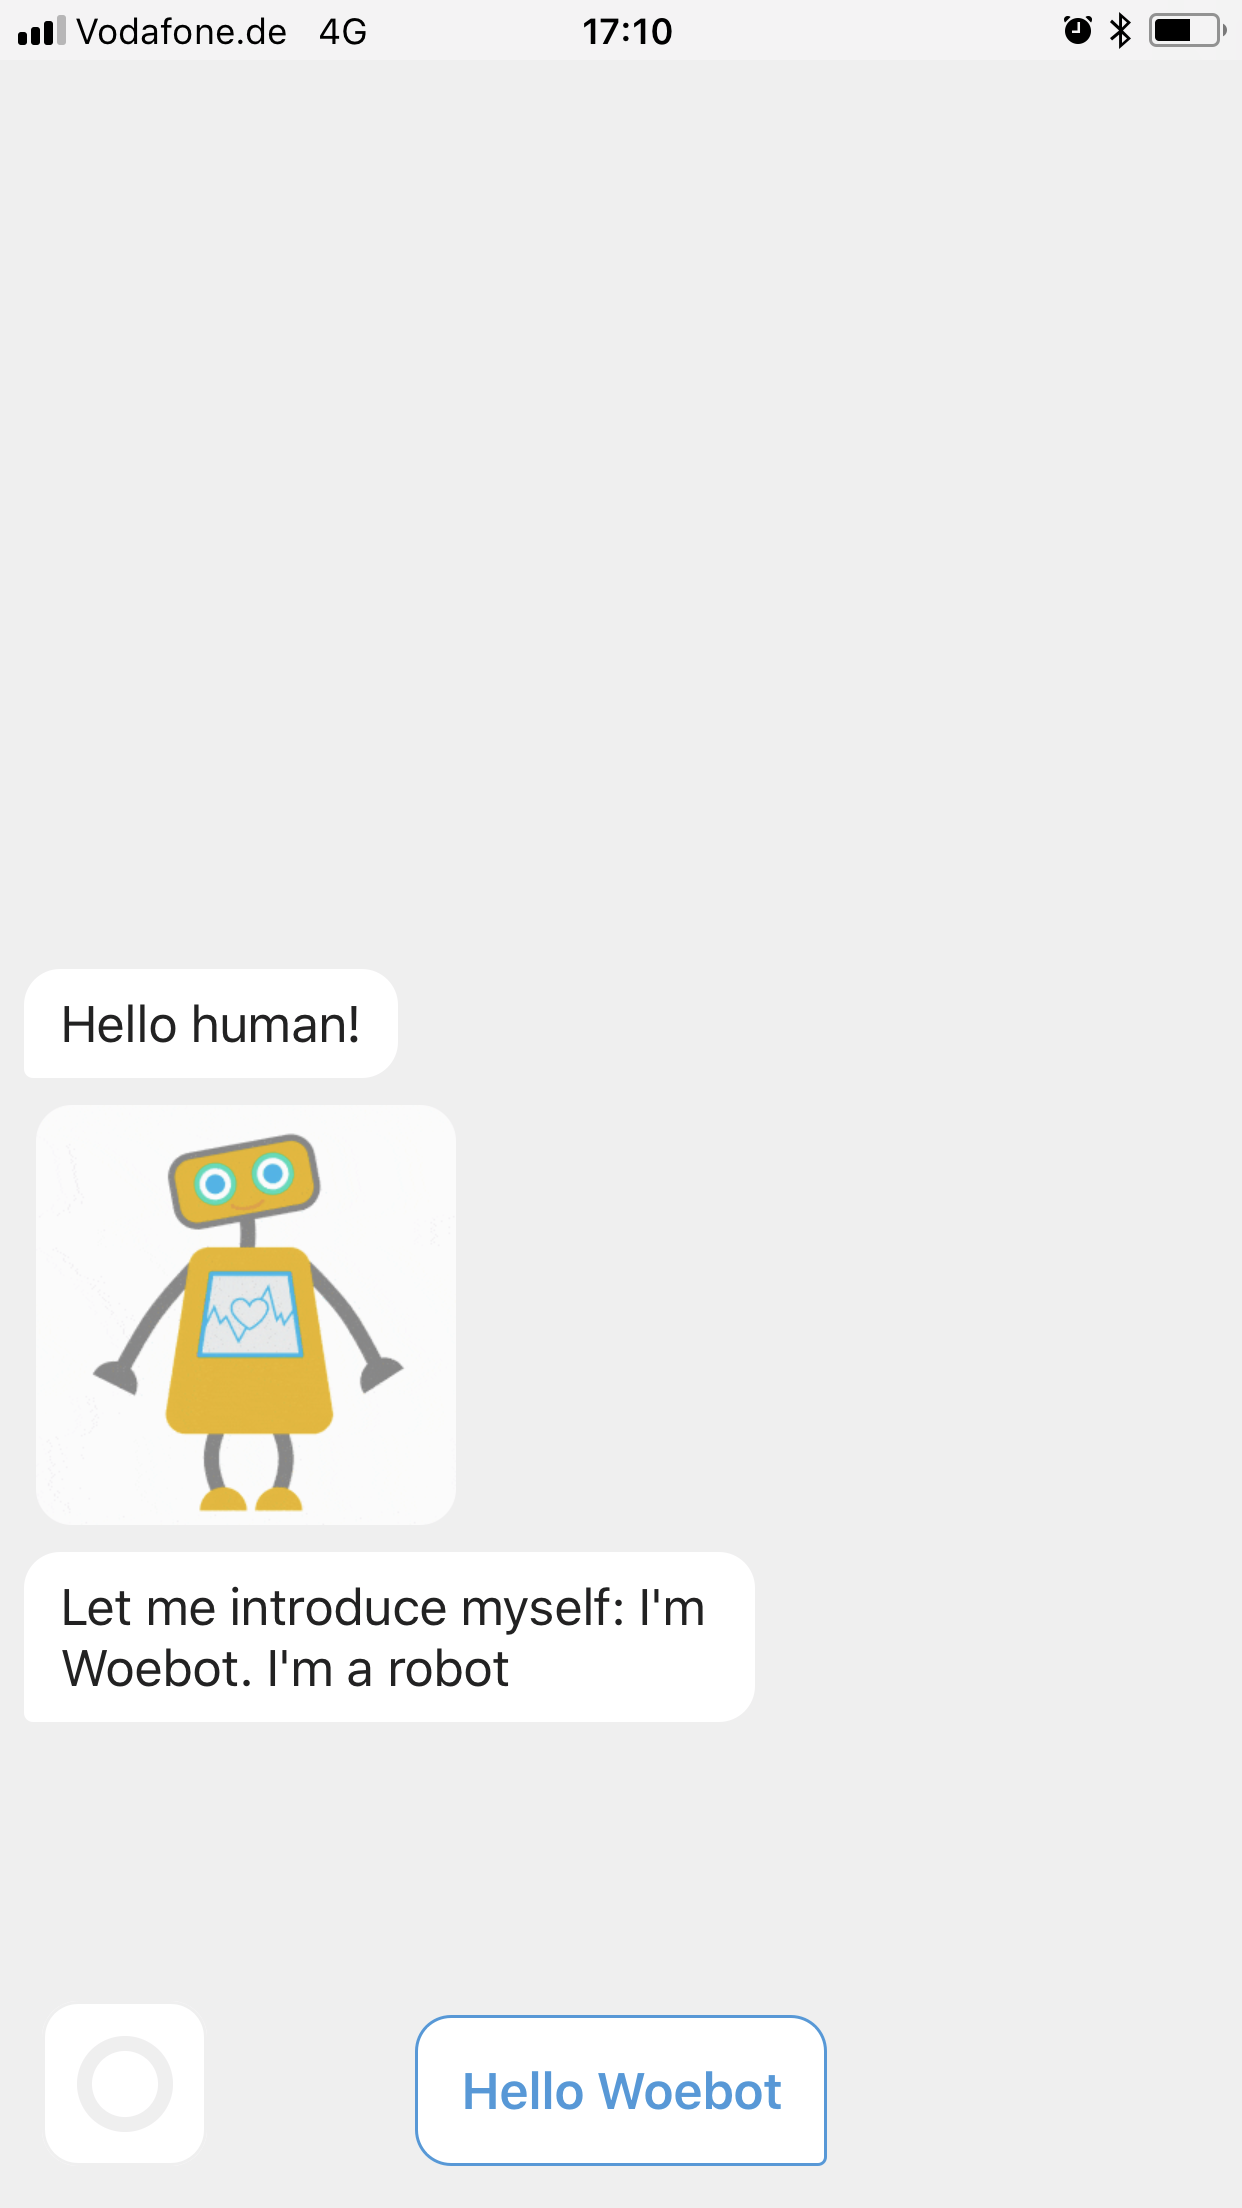 Woebot interface with introductory message